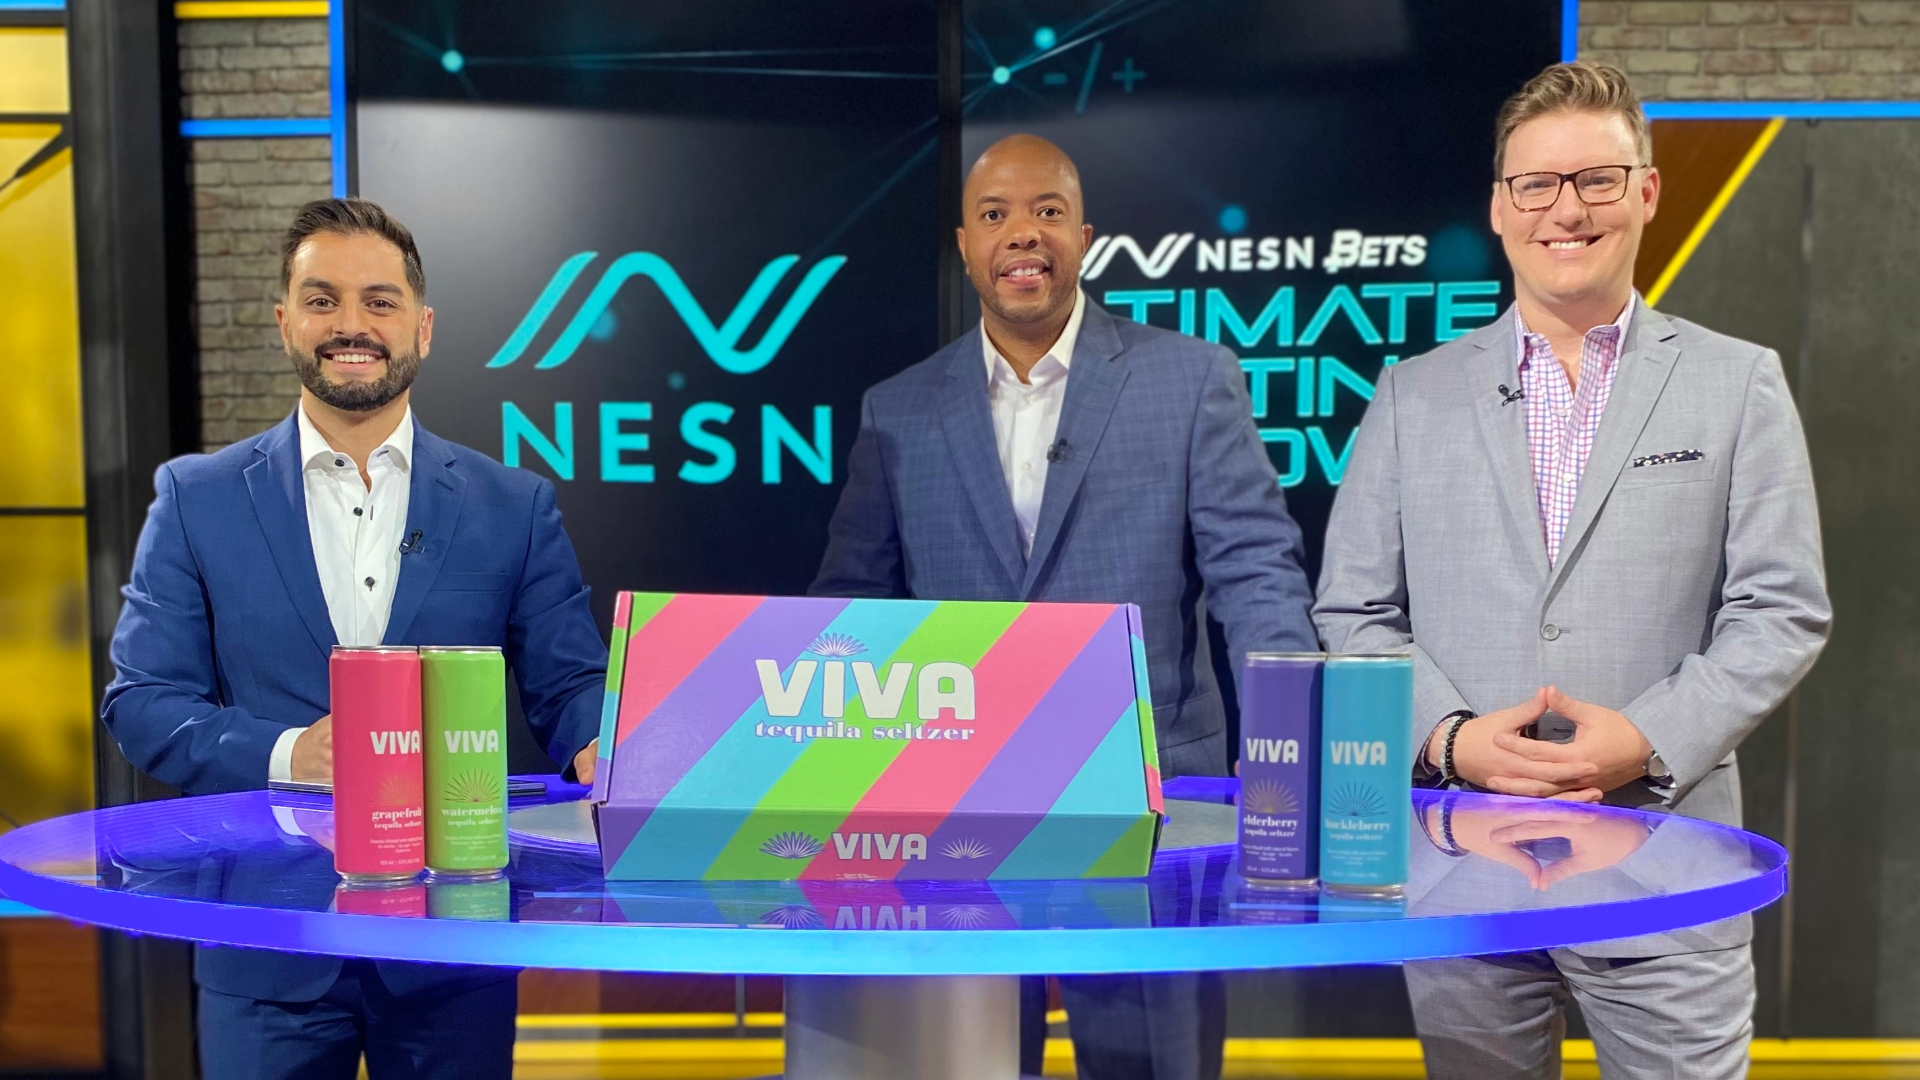 NESN Renews Partnership With Viva Beverages As Official Hard Seltzer
Of Hockey, Baseball Coverage